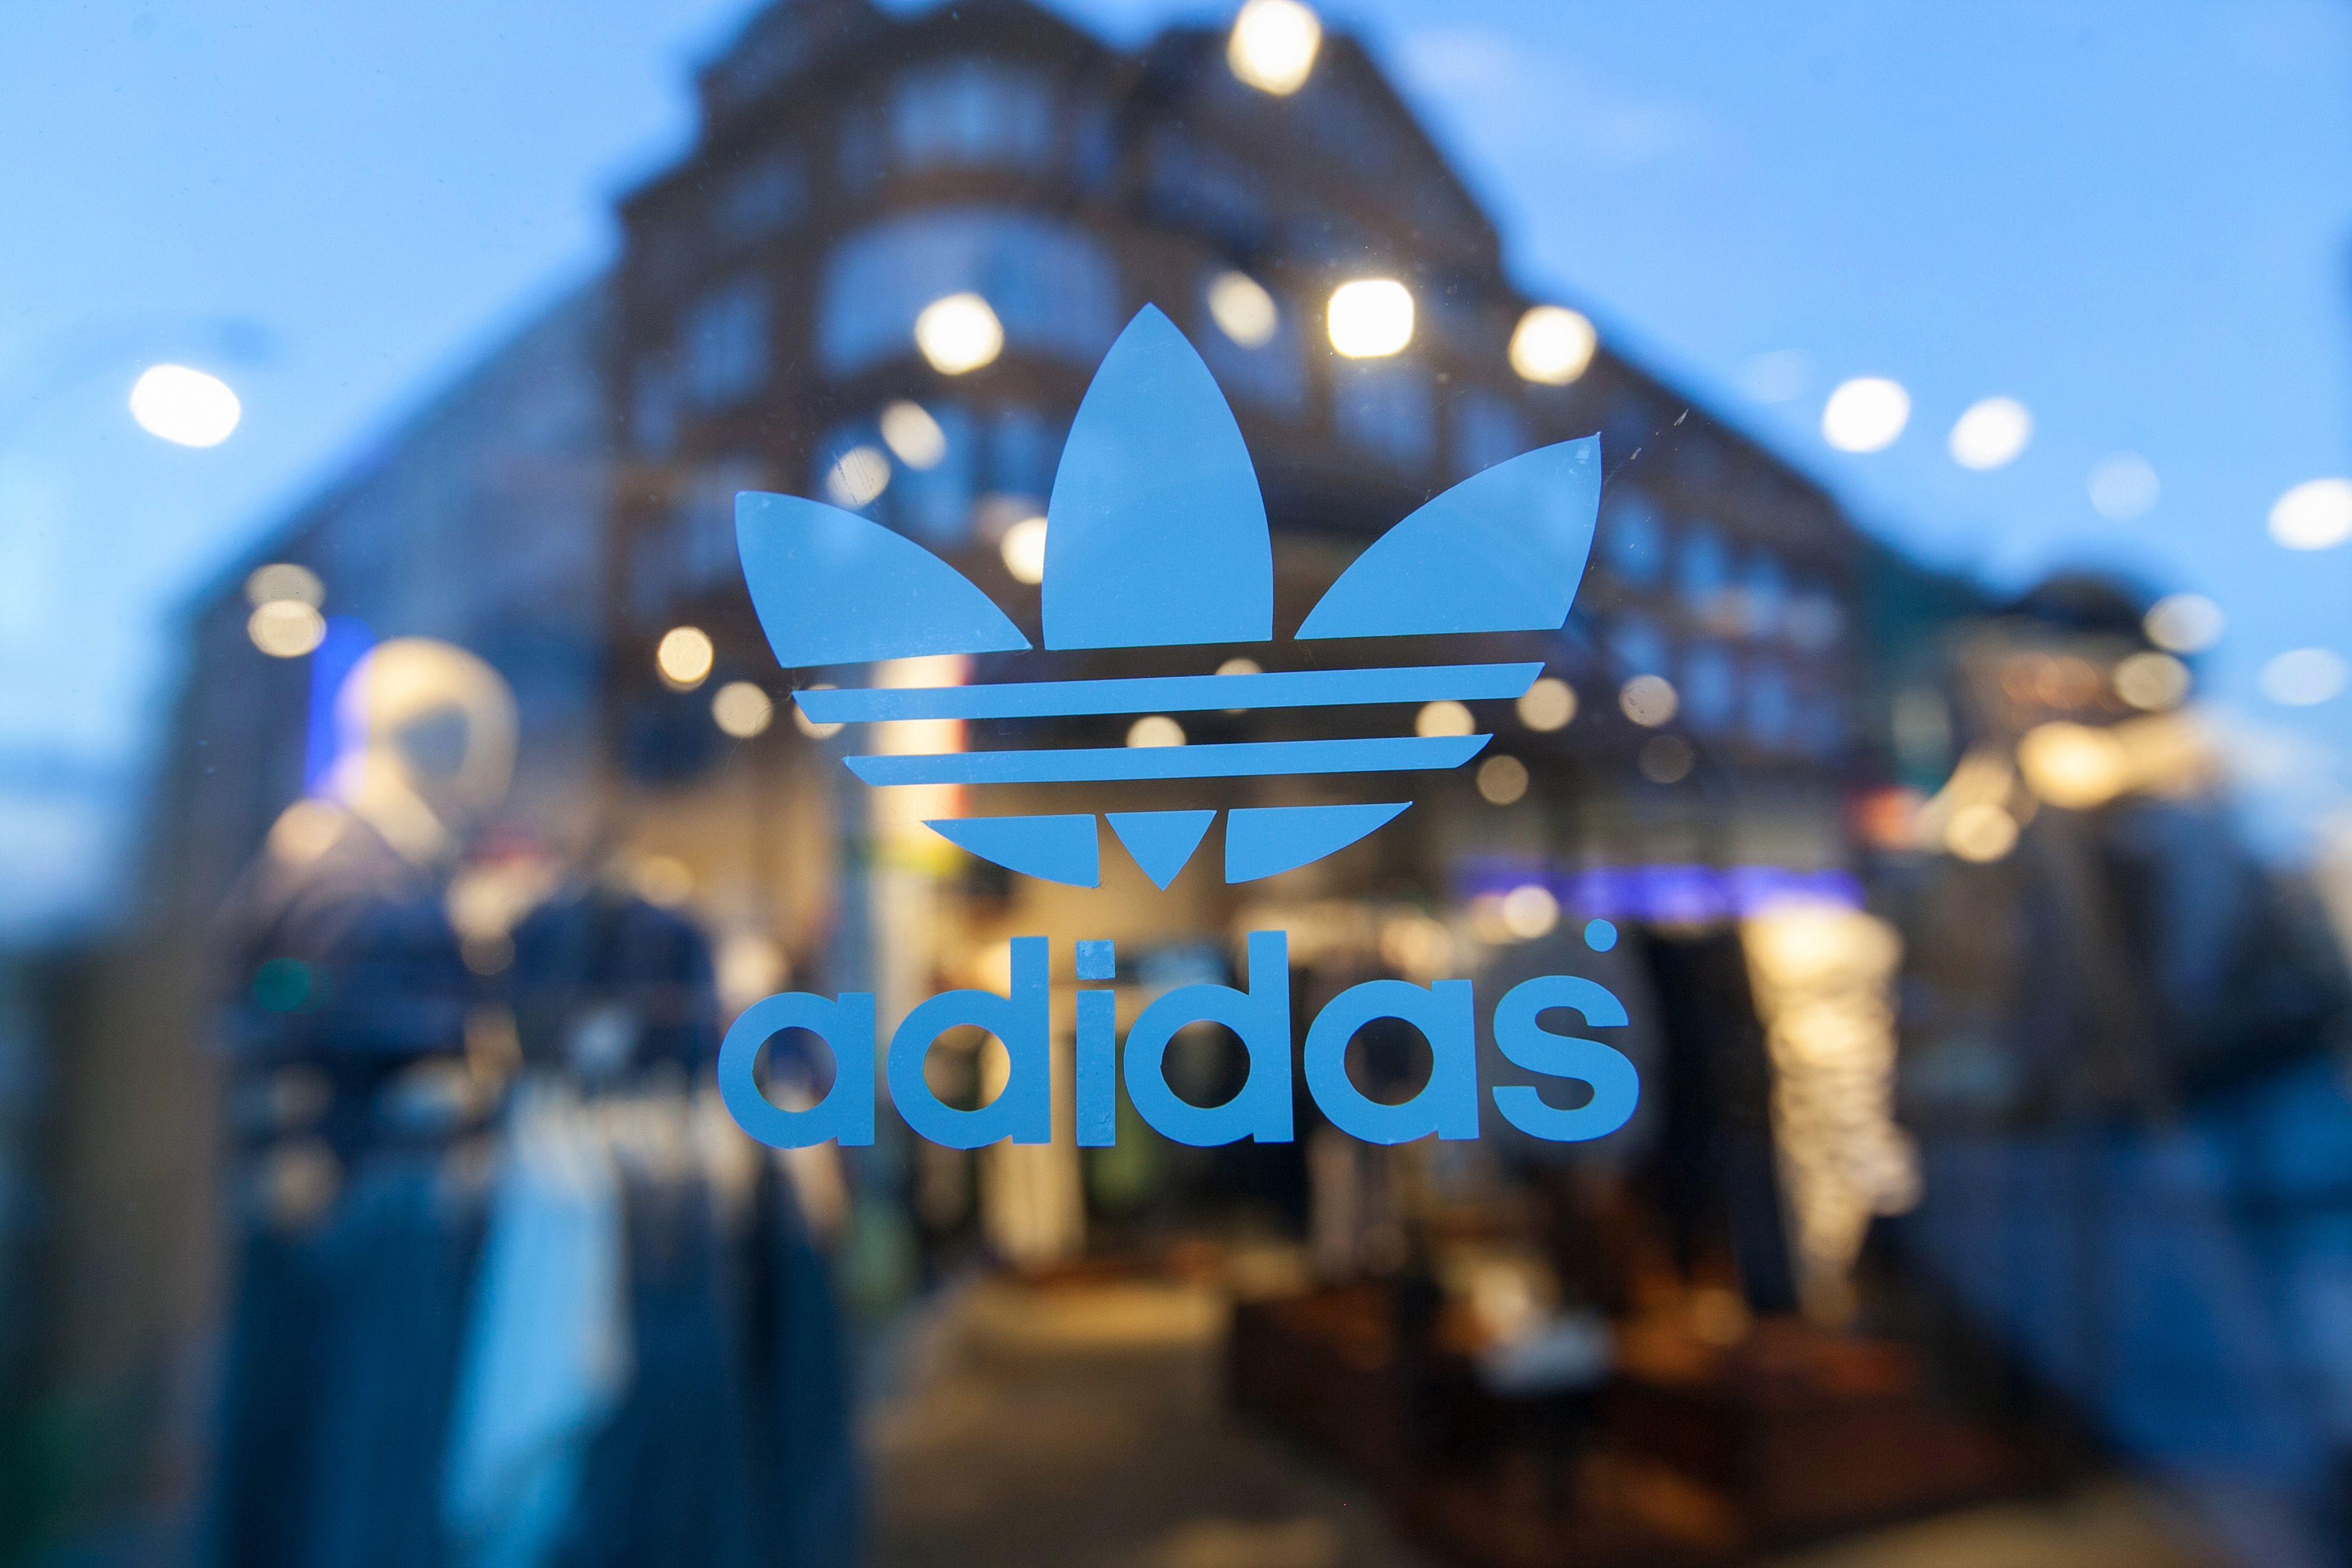 German Adidas Logo - Adidas Will Start Production in Germany Again, Using Robots | Time